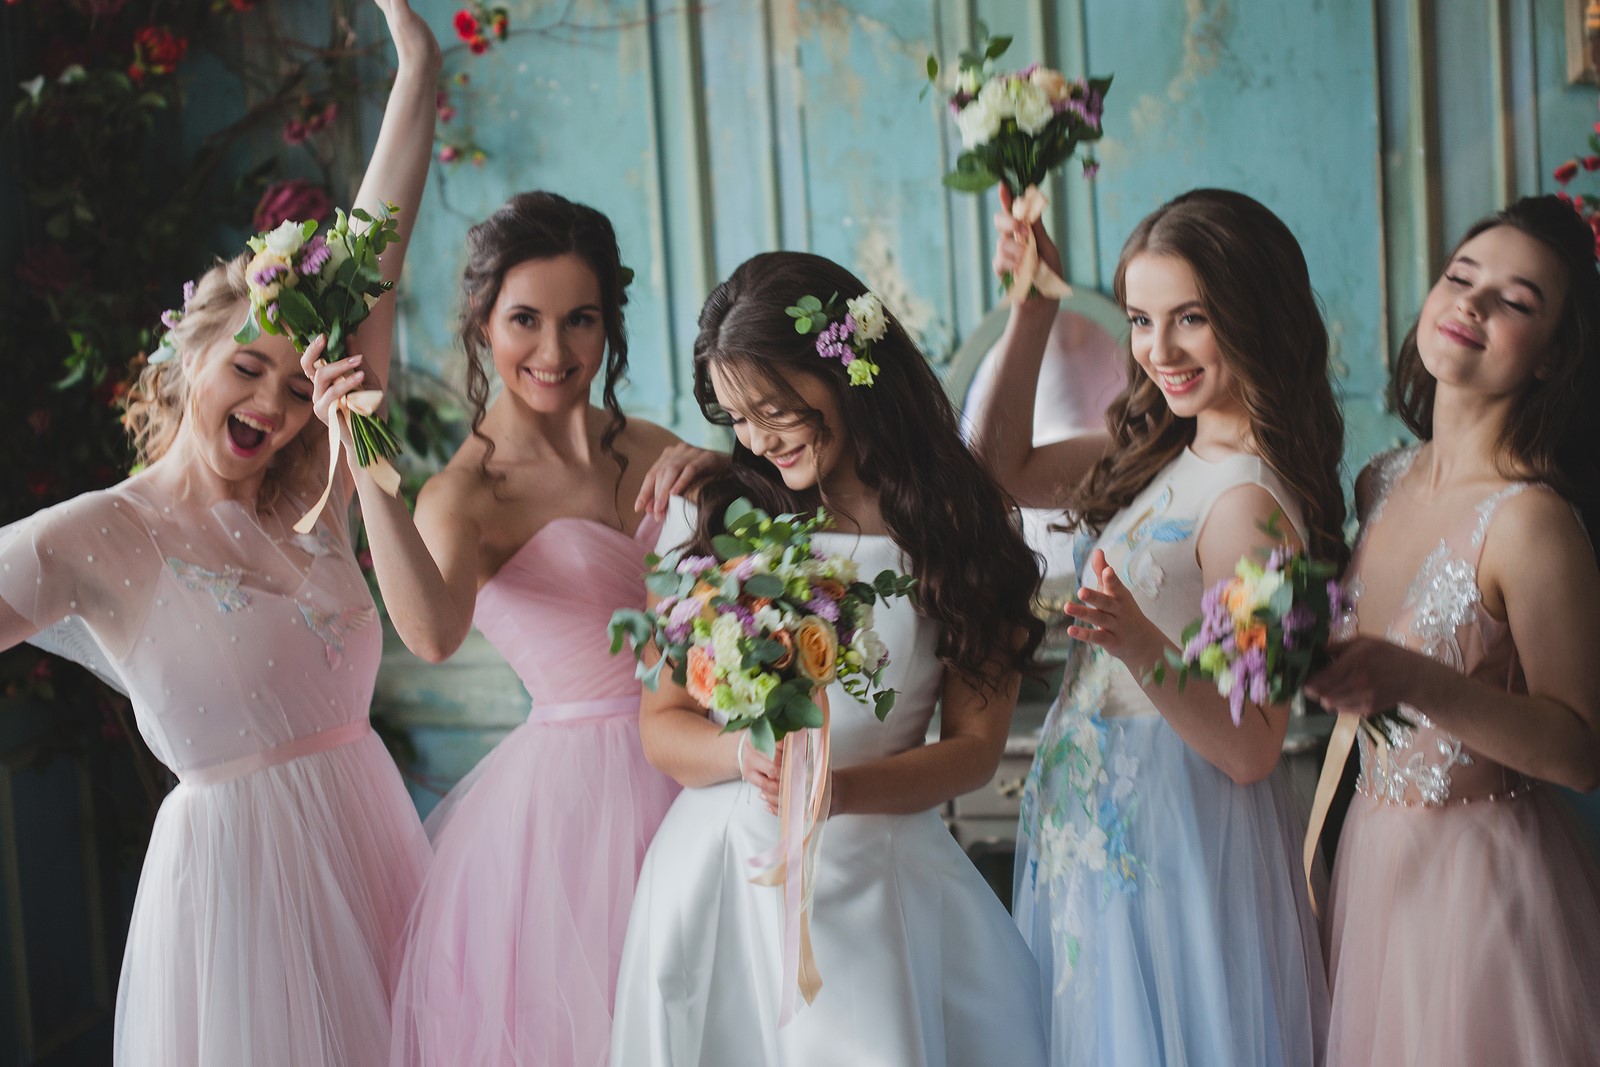 Style Guide: Dressing up Bridesmaids to Match the Bride